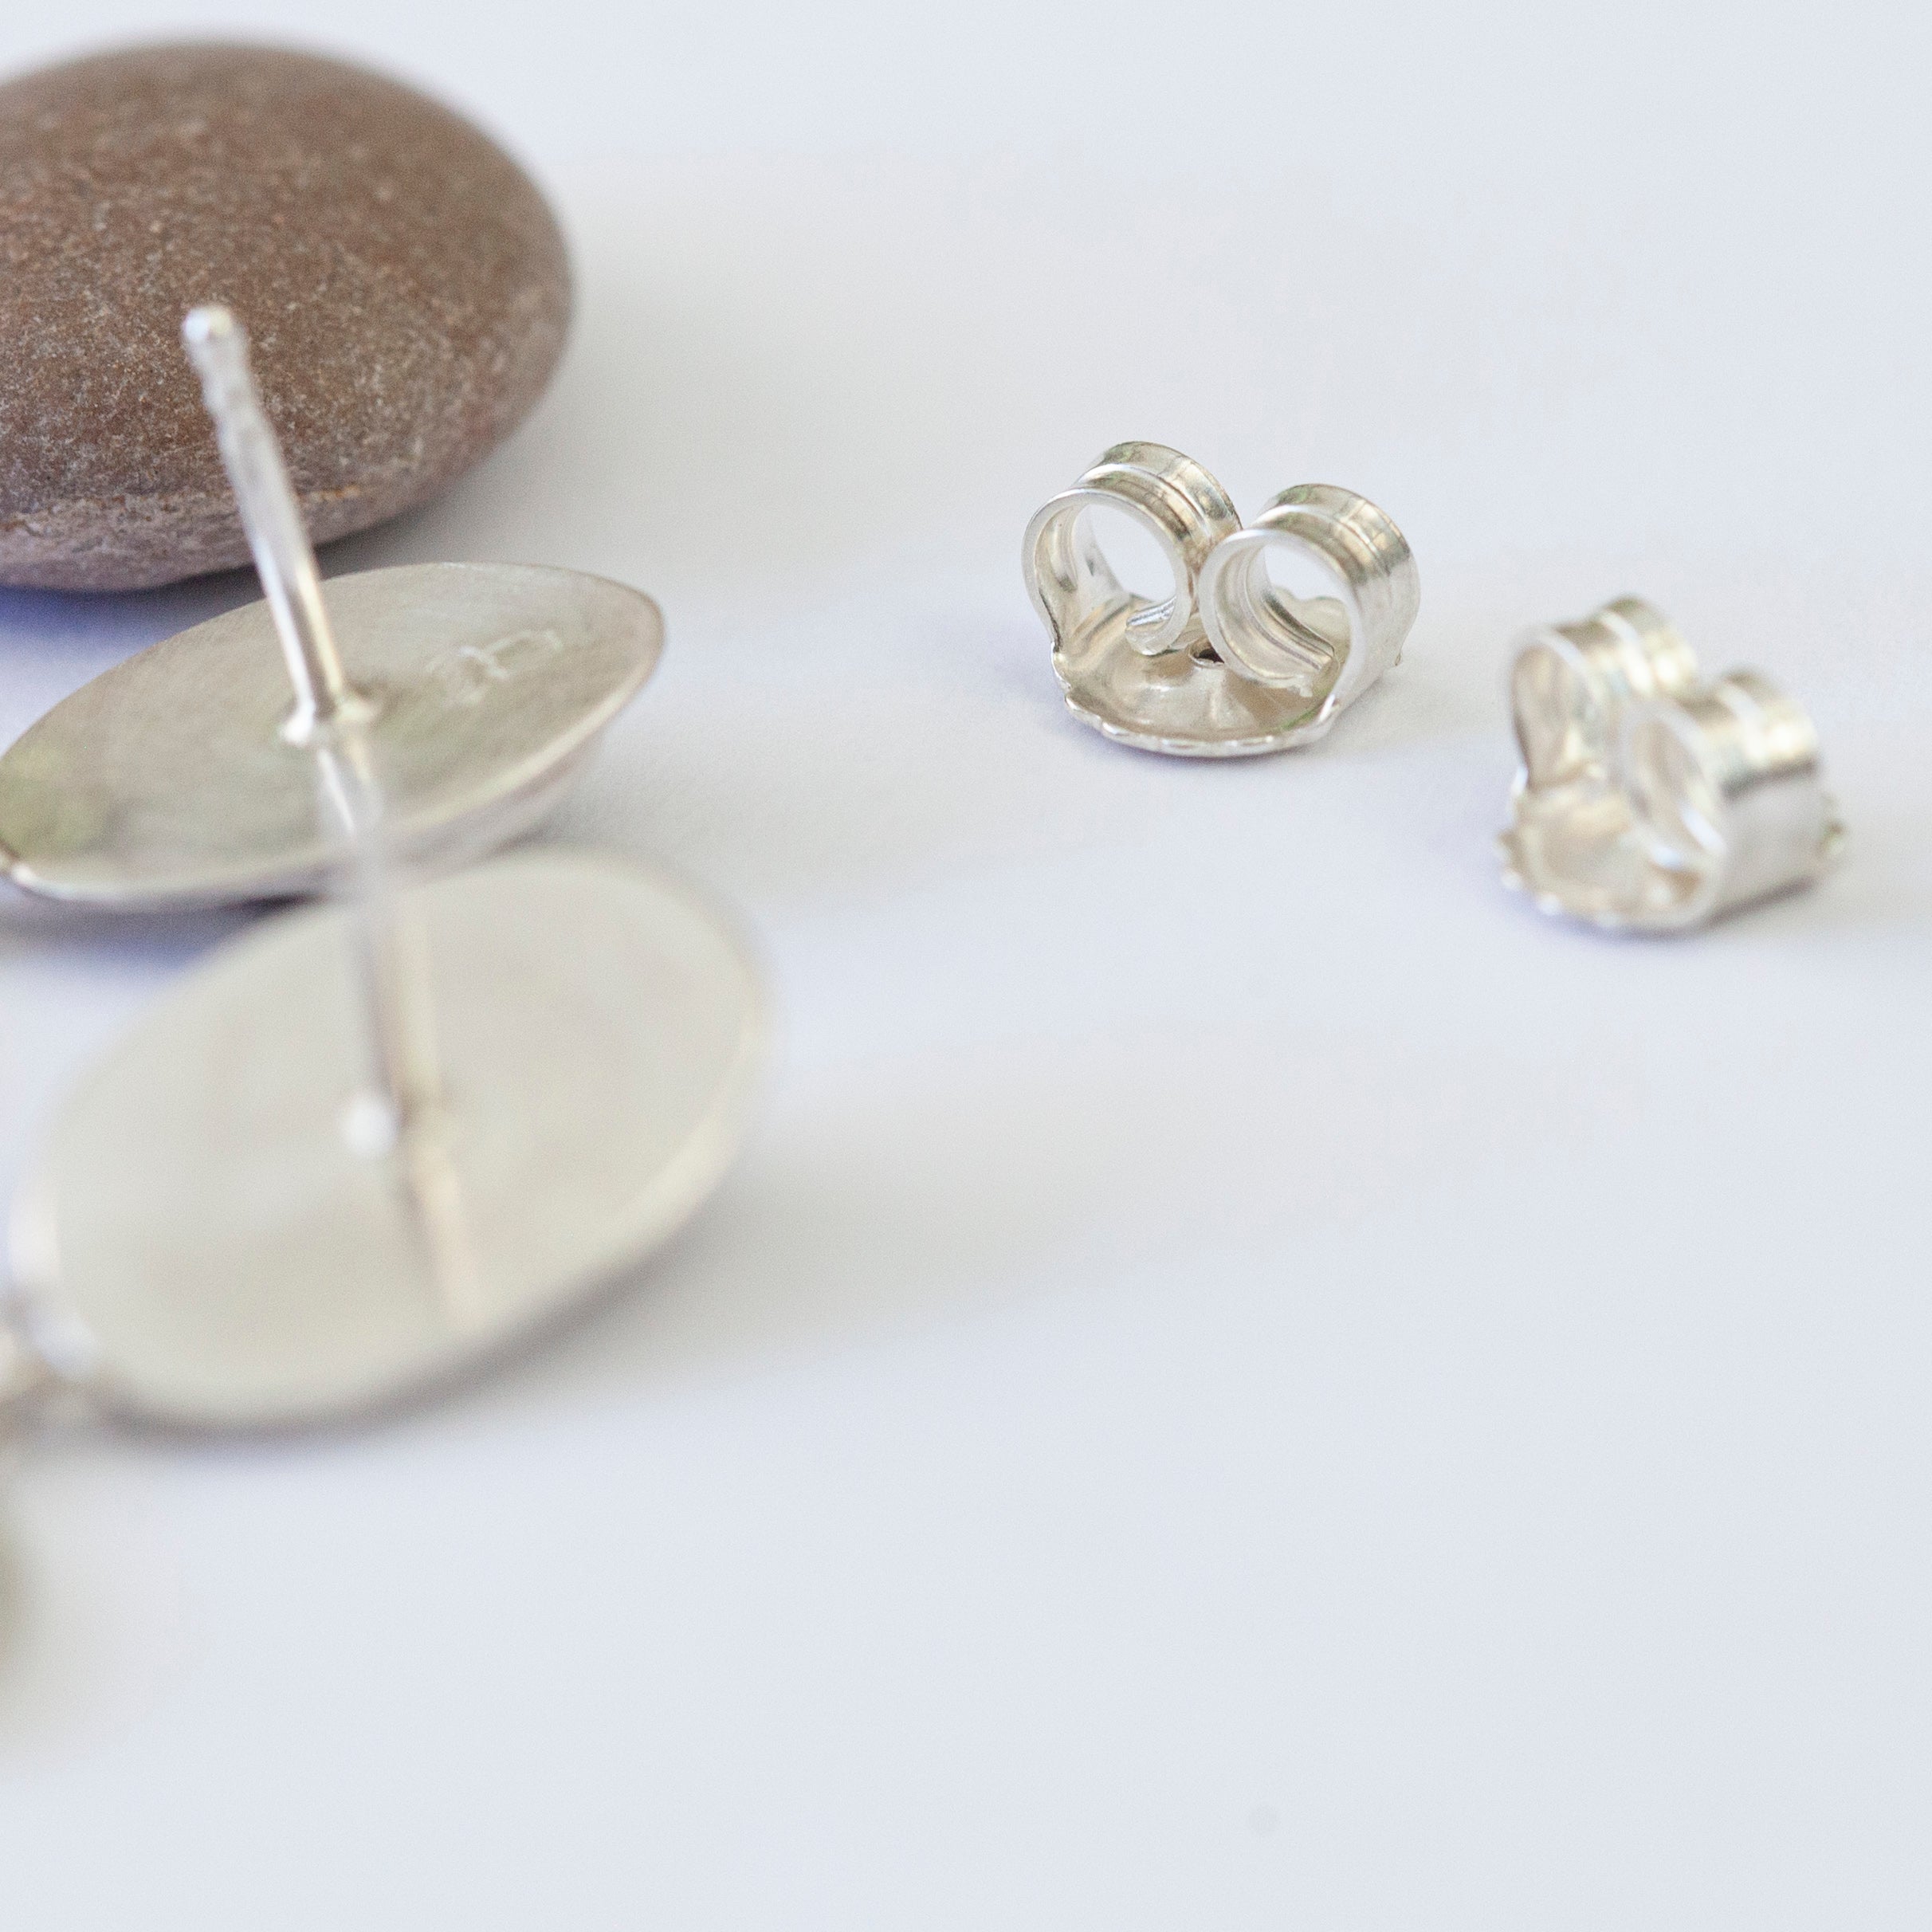 OOAK delicate intuition earrings with natural pebbles (ready-to-ship)